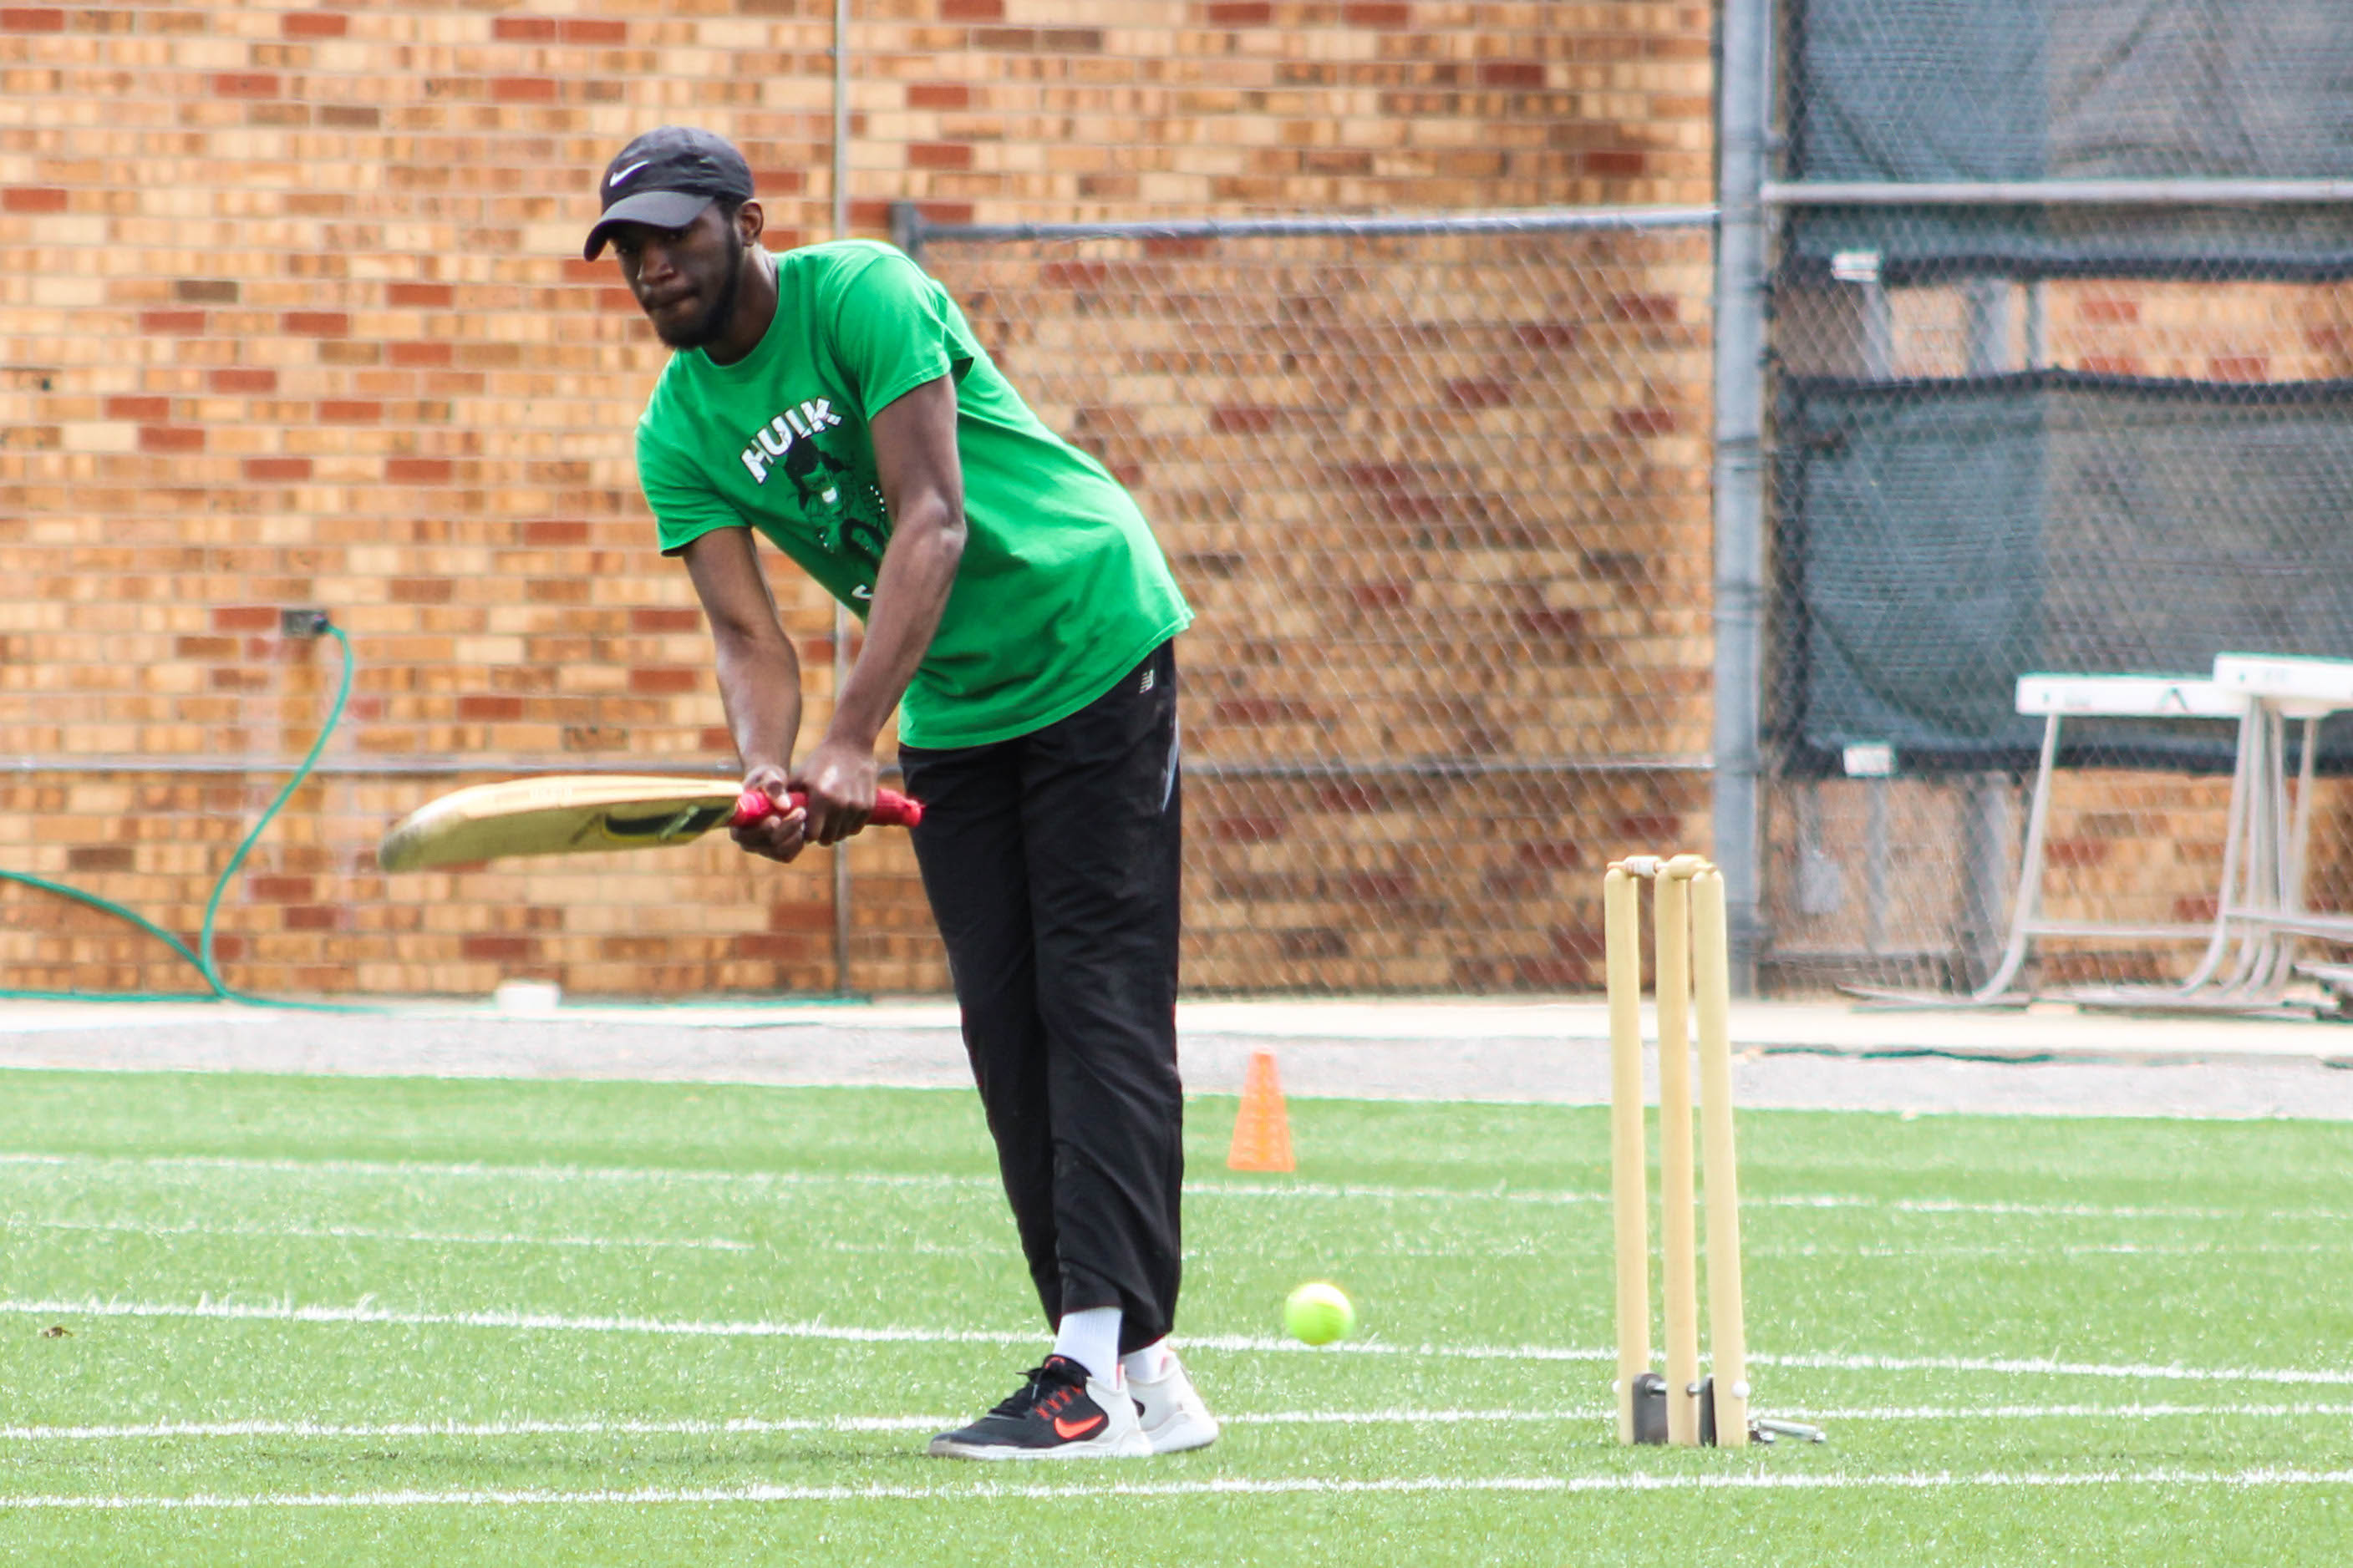 Mechanical engineering senior Brian Blair plays in the CSO Cricket competition, April 7, 2019. (Photo courtesy/Brian Blair)